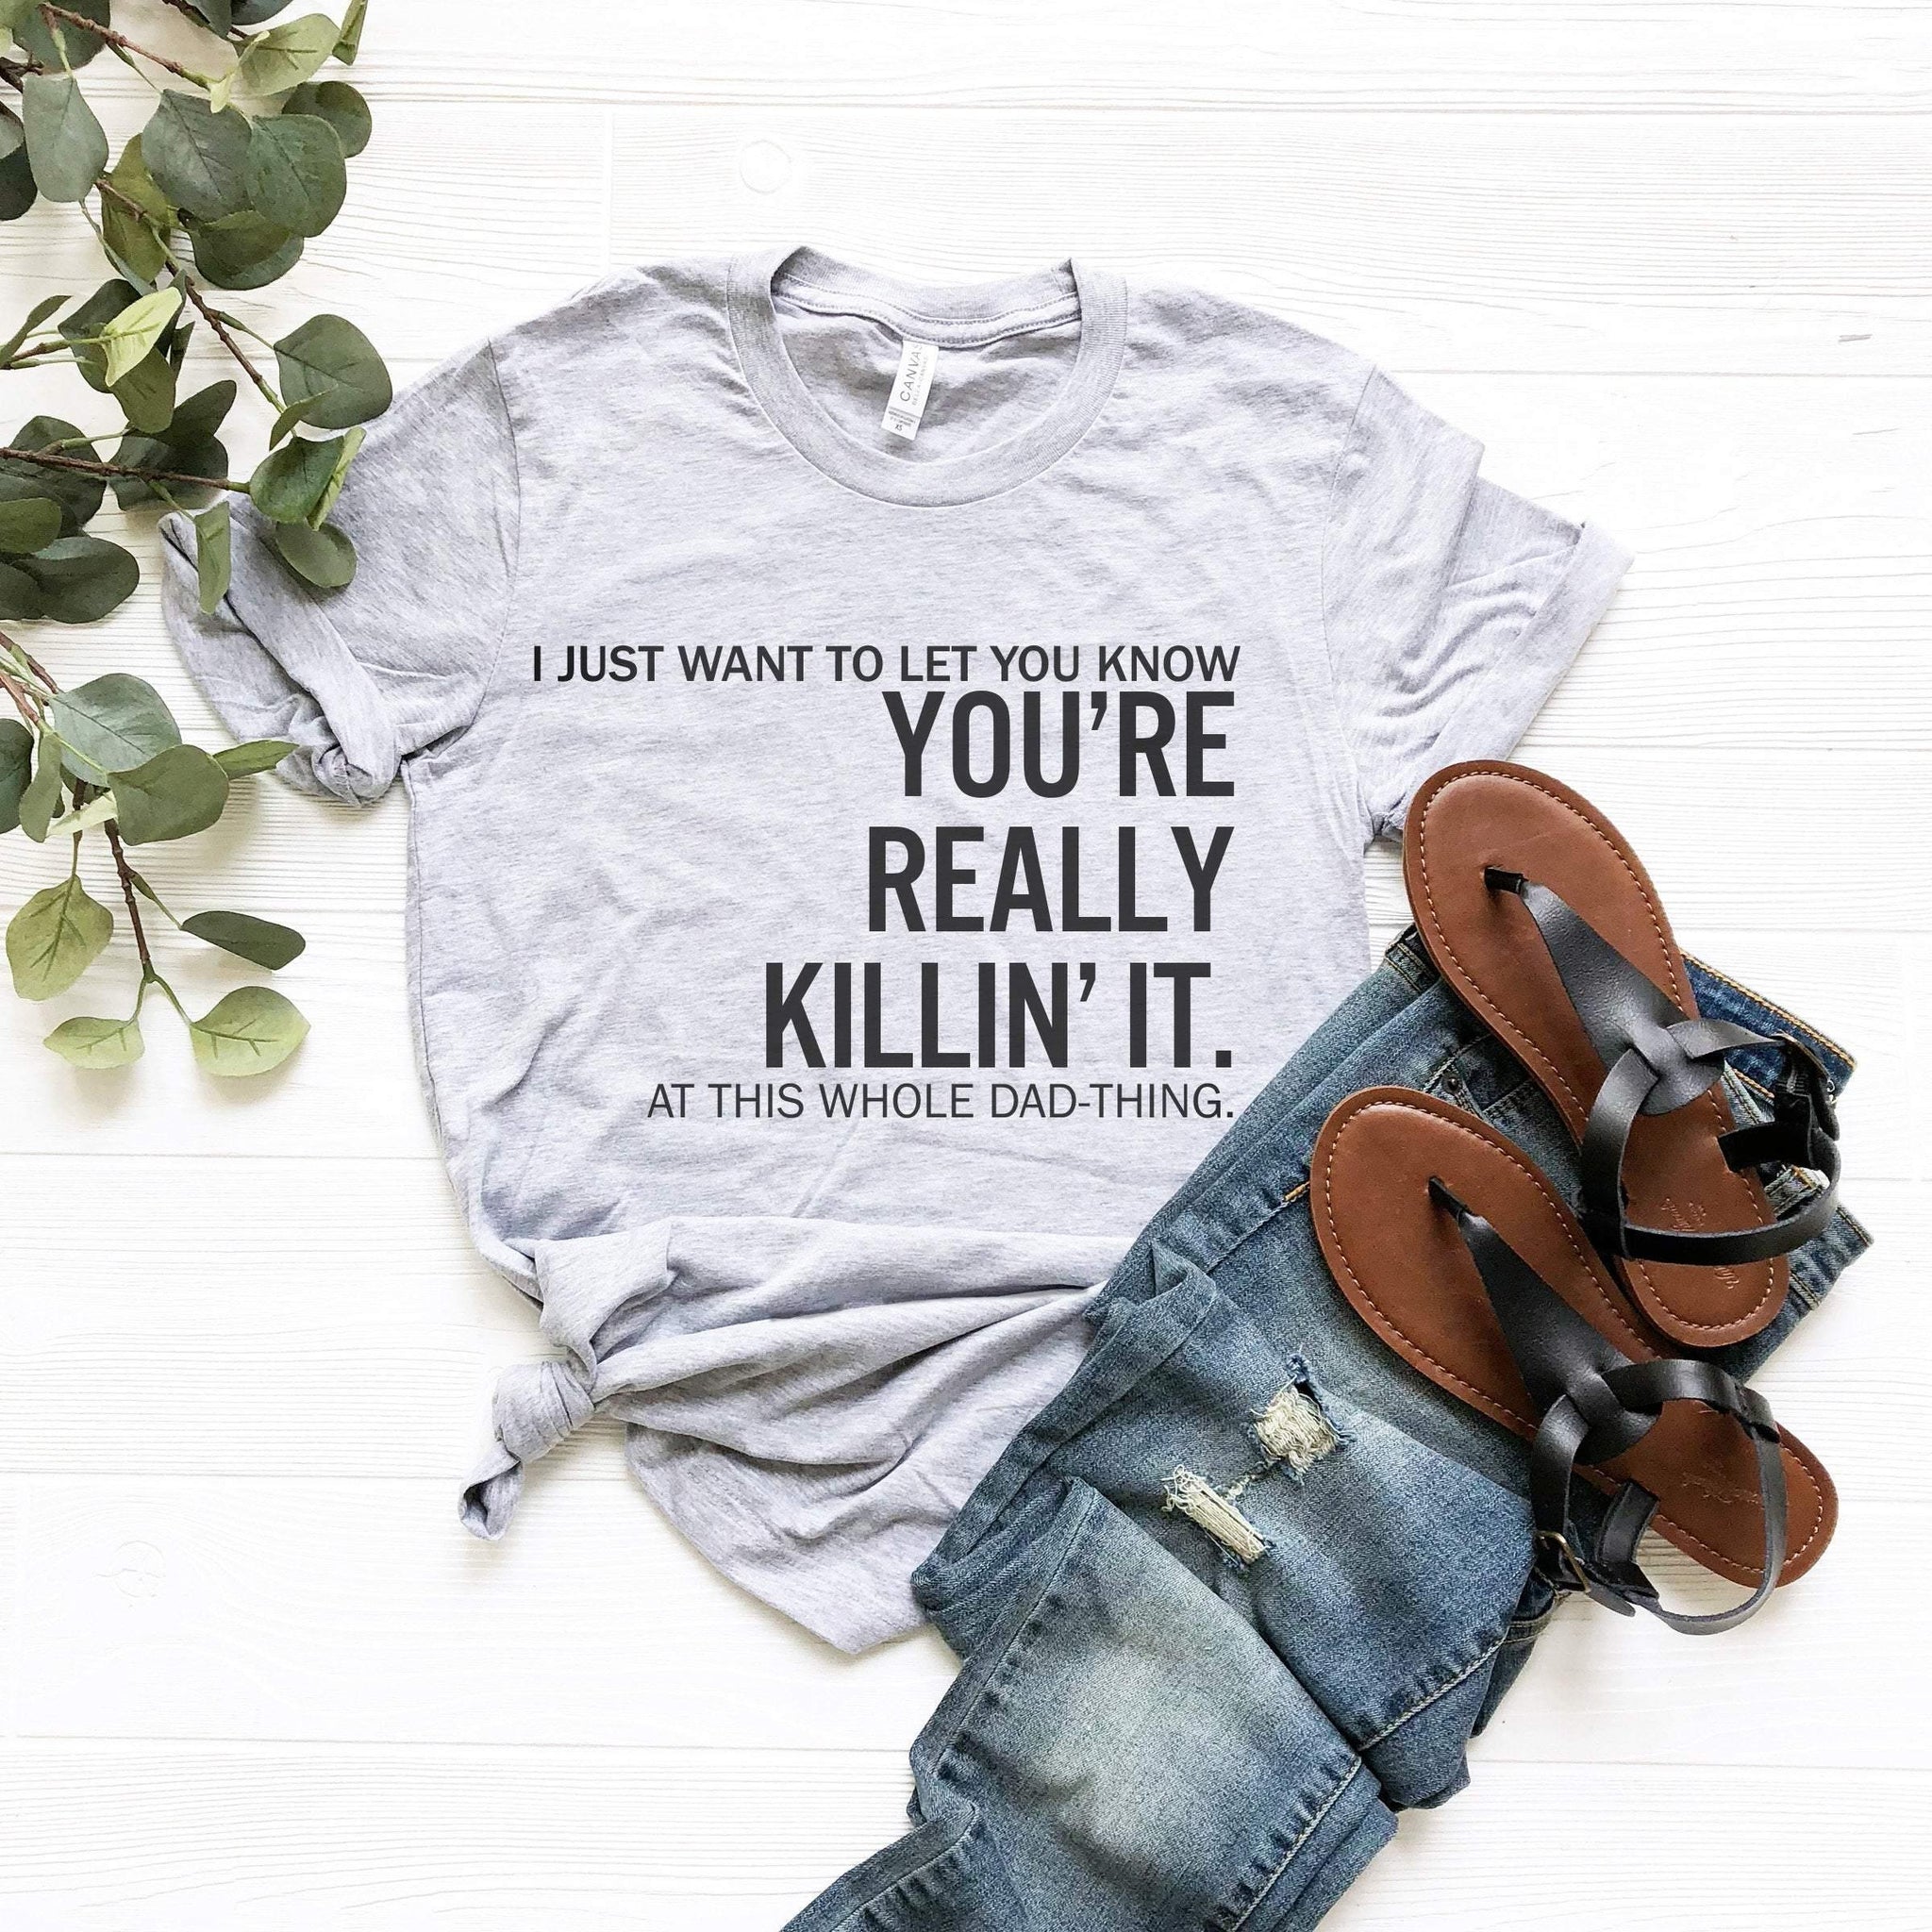 Dad You Are Really Killin' It, Funny Dad Shirts, for Fathers Day, Dad Gifts , Dad Shirts from Daughter, Funny Shirts for Dad